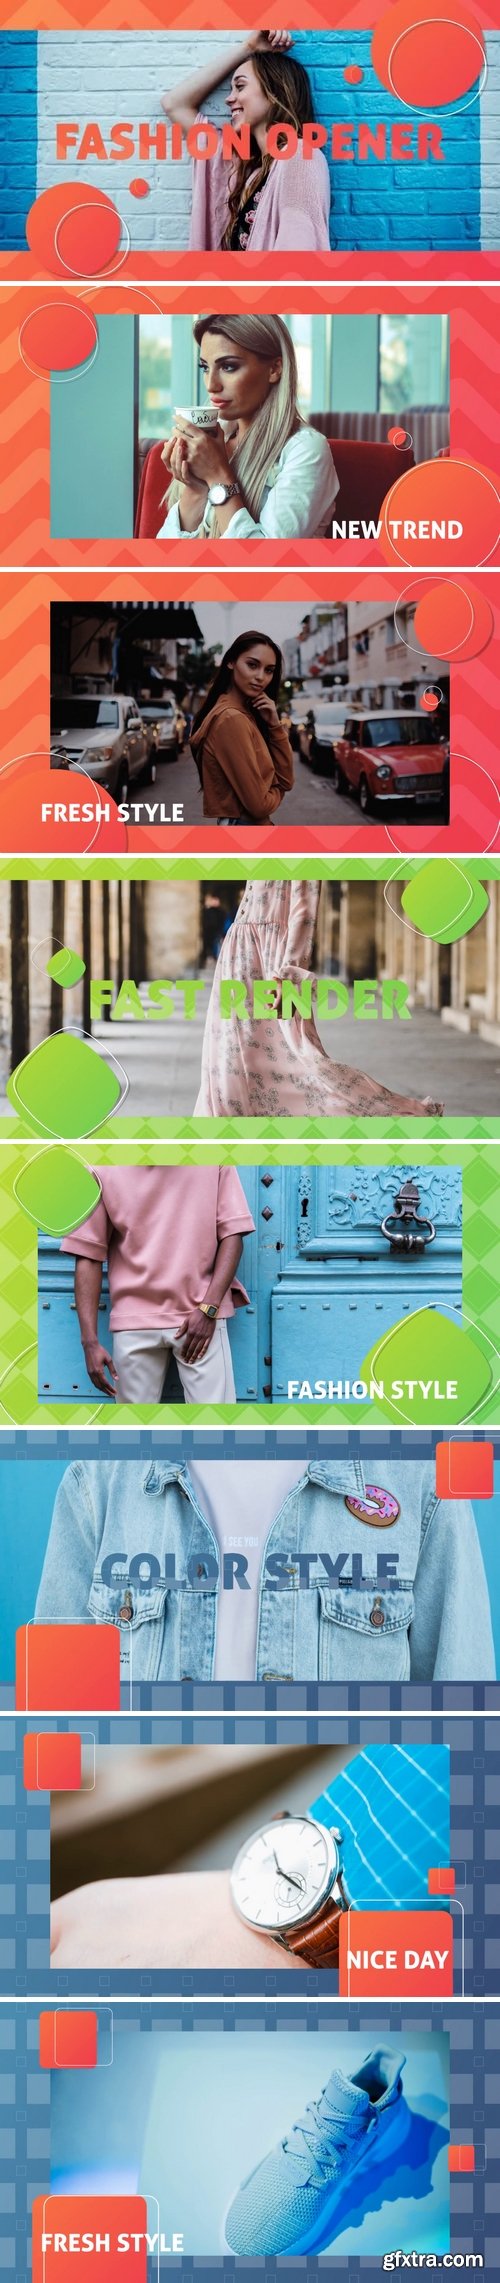 MotionArray - Fashion Promo After Effects Templates 160048